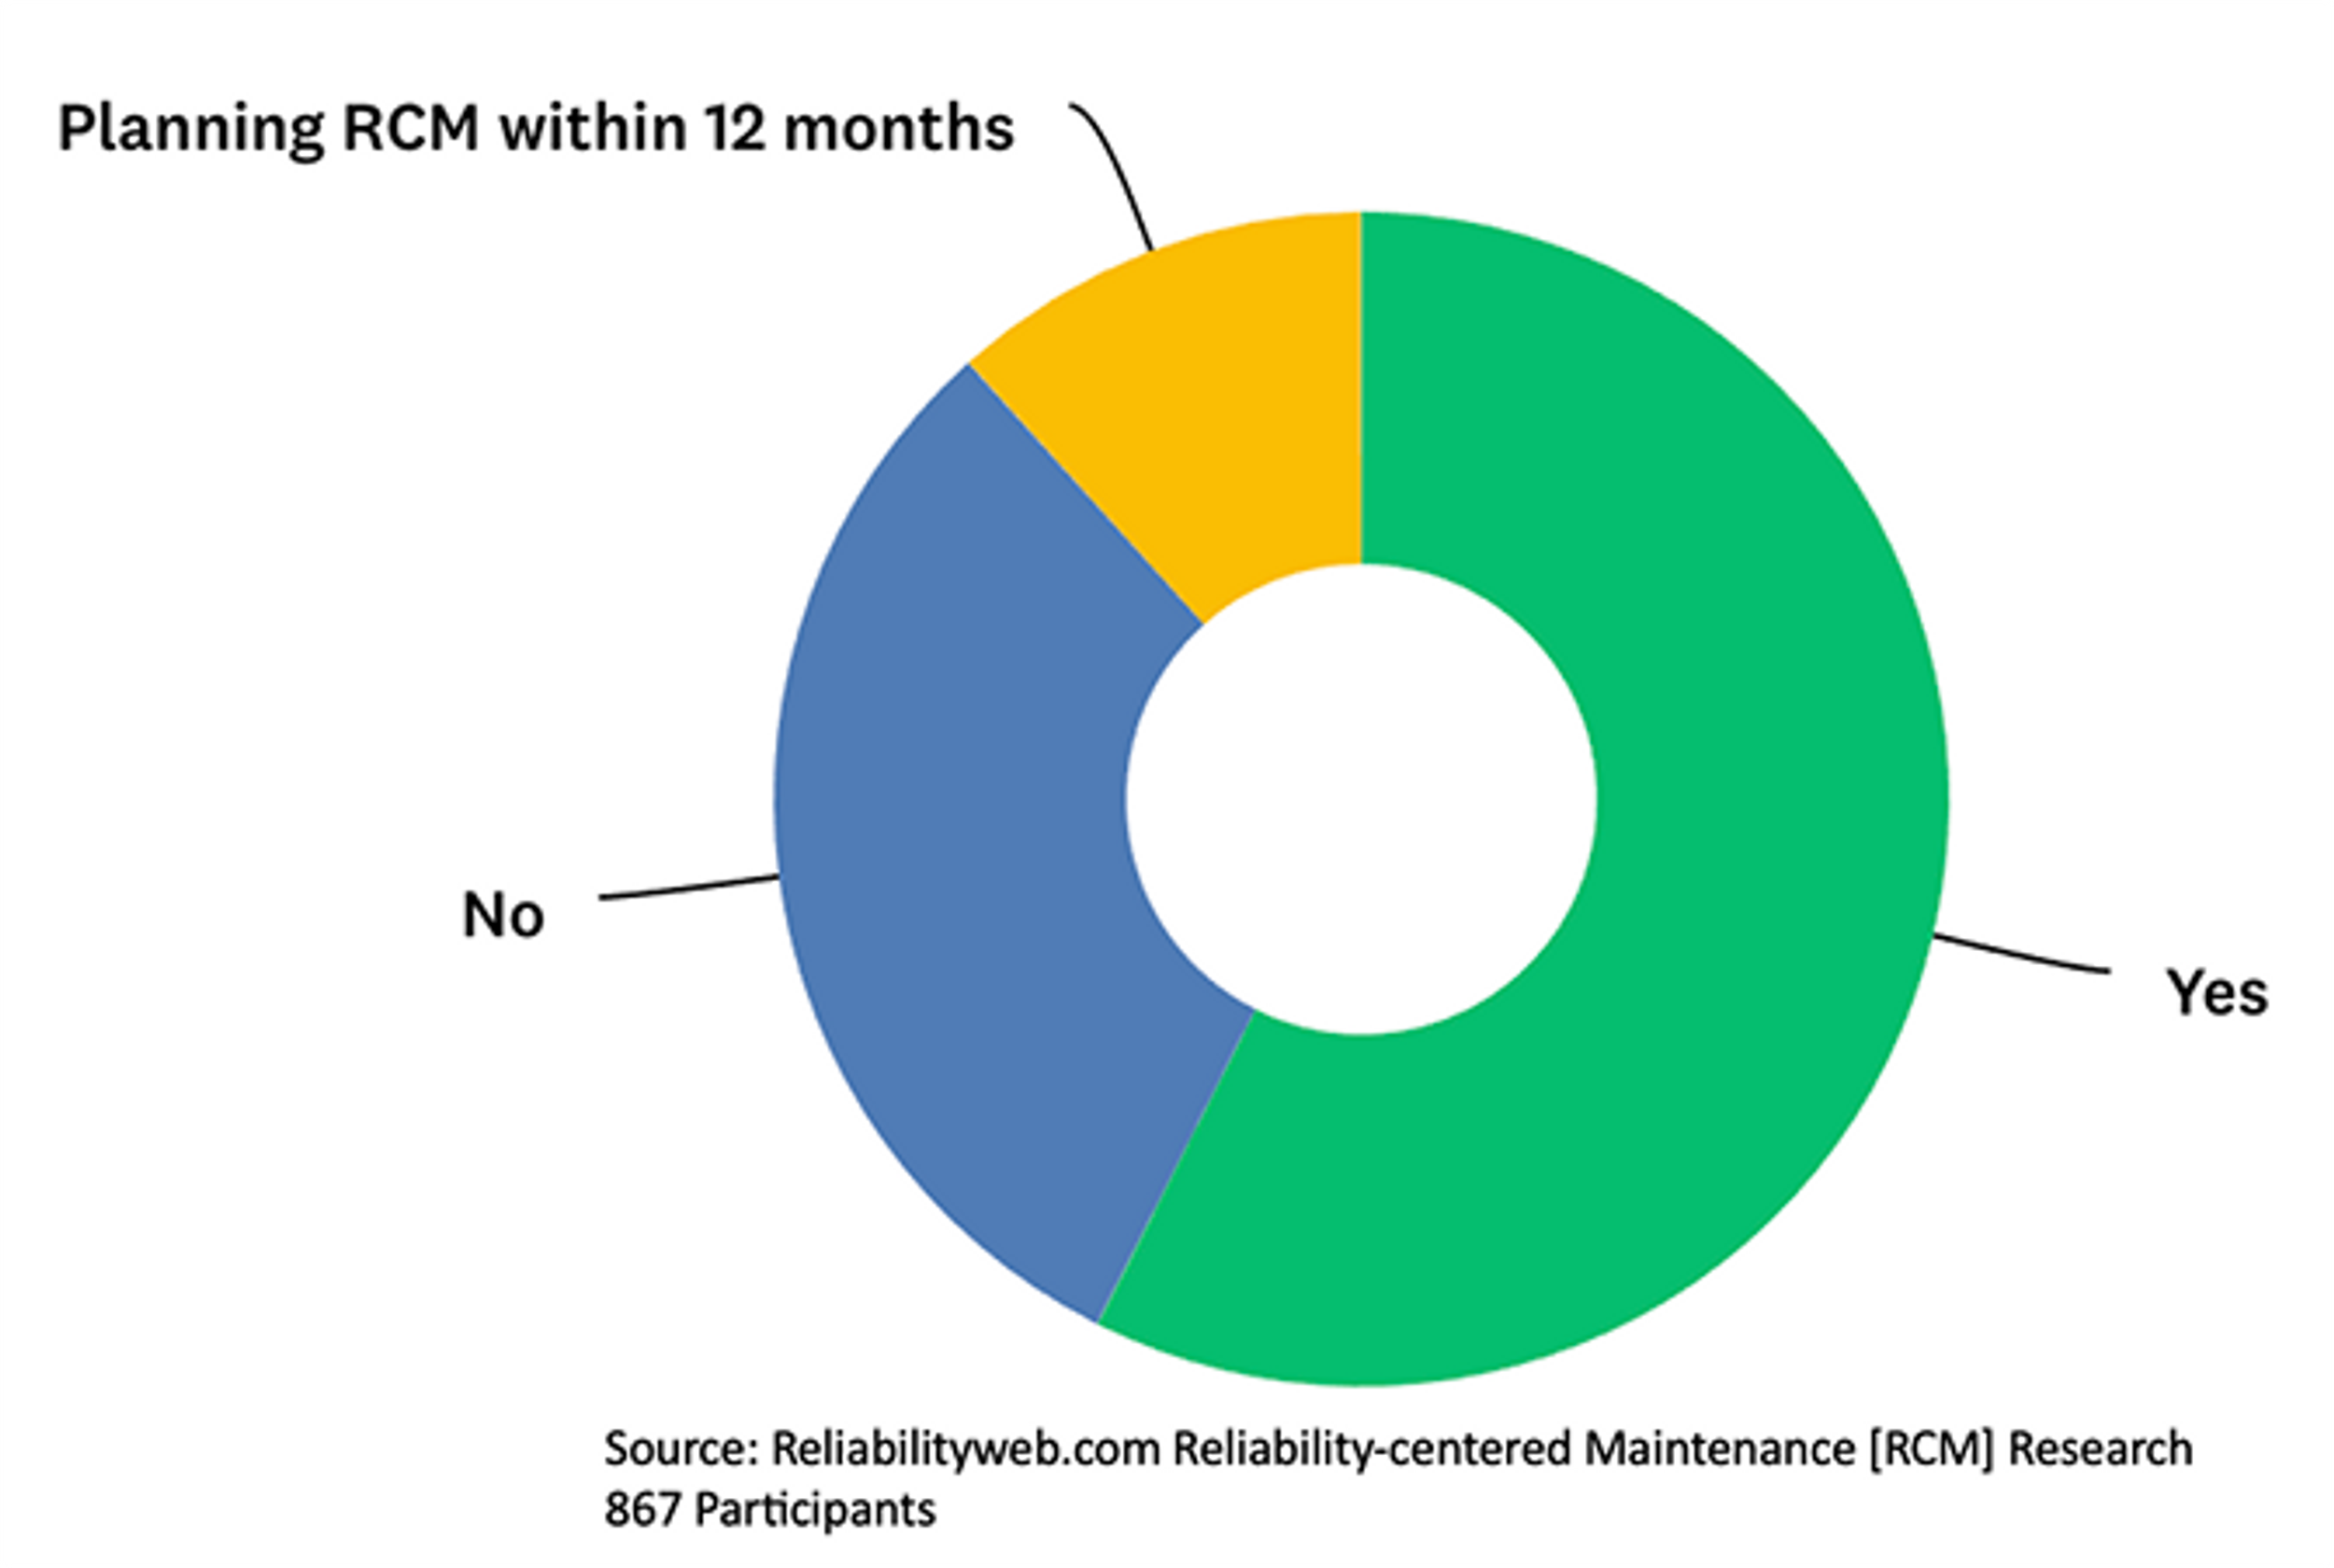 Has your company ever used Reliability Centered Maintenance (RCM) to define maintenance requirements?